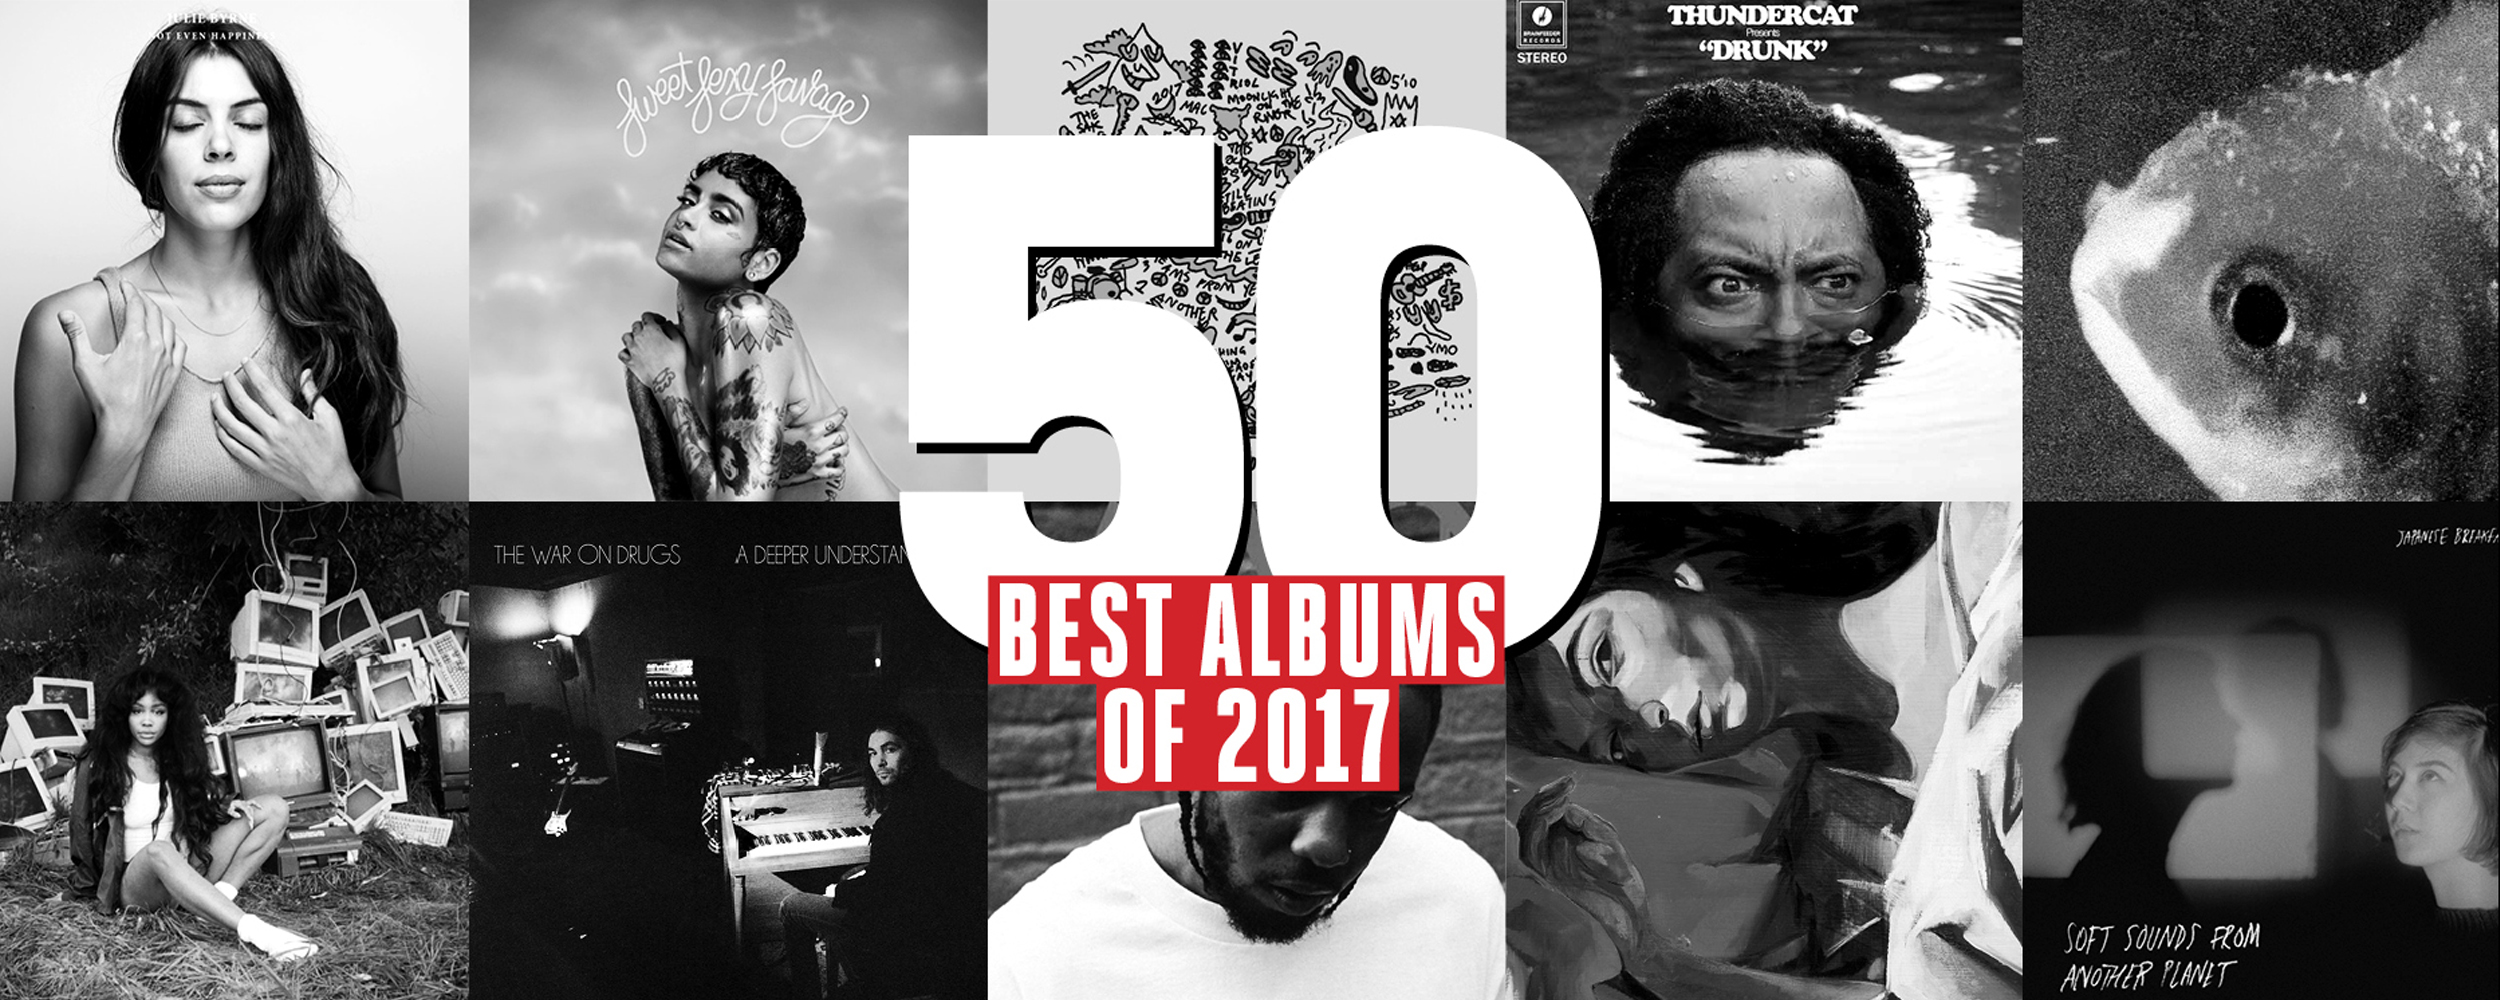 The 50 Best Albums of 2017